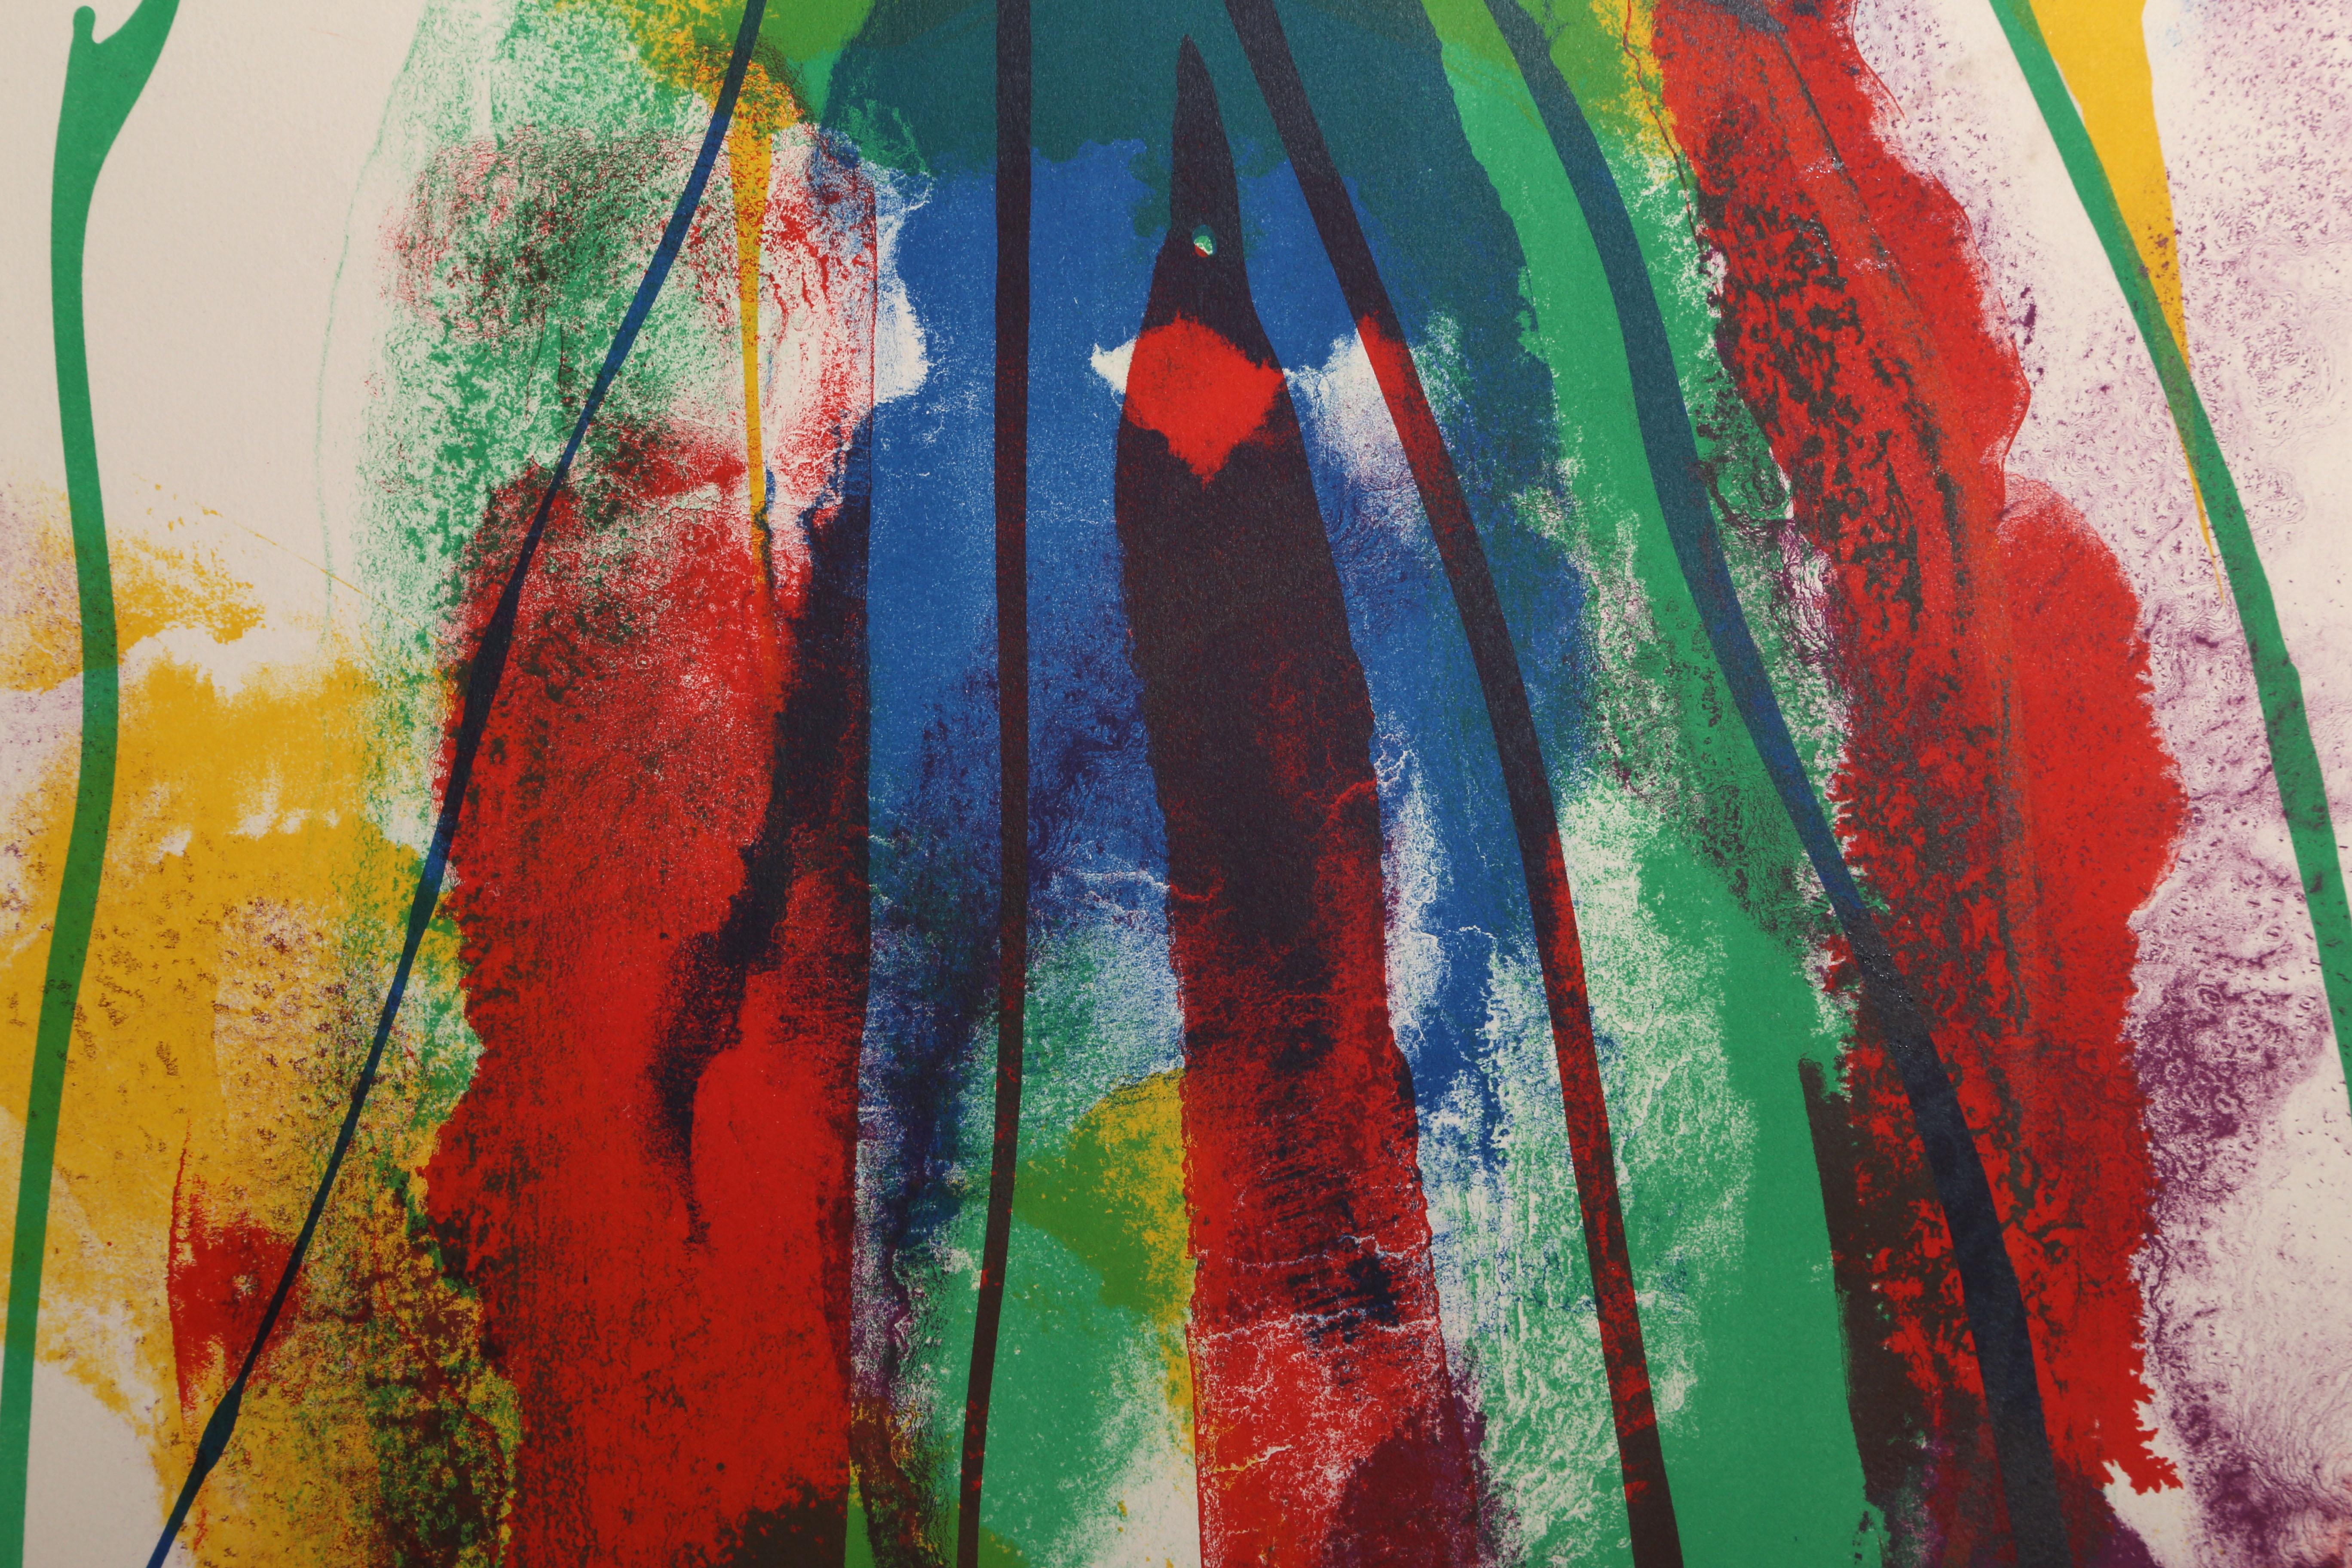 Artist: Paul Jenkins, American (1923 - 2012)
Title: Earth Day
Year: 1971
Medium: Lithograph on Mourlot watermarked Wove Paper, signed in the plate
Size: 29 in. x 21.5 in. (73.66 cm x 54.61 cm)